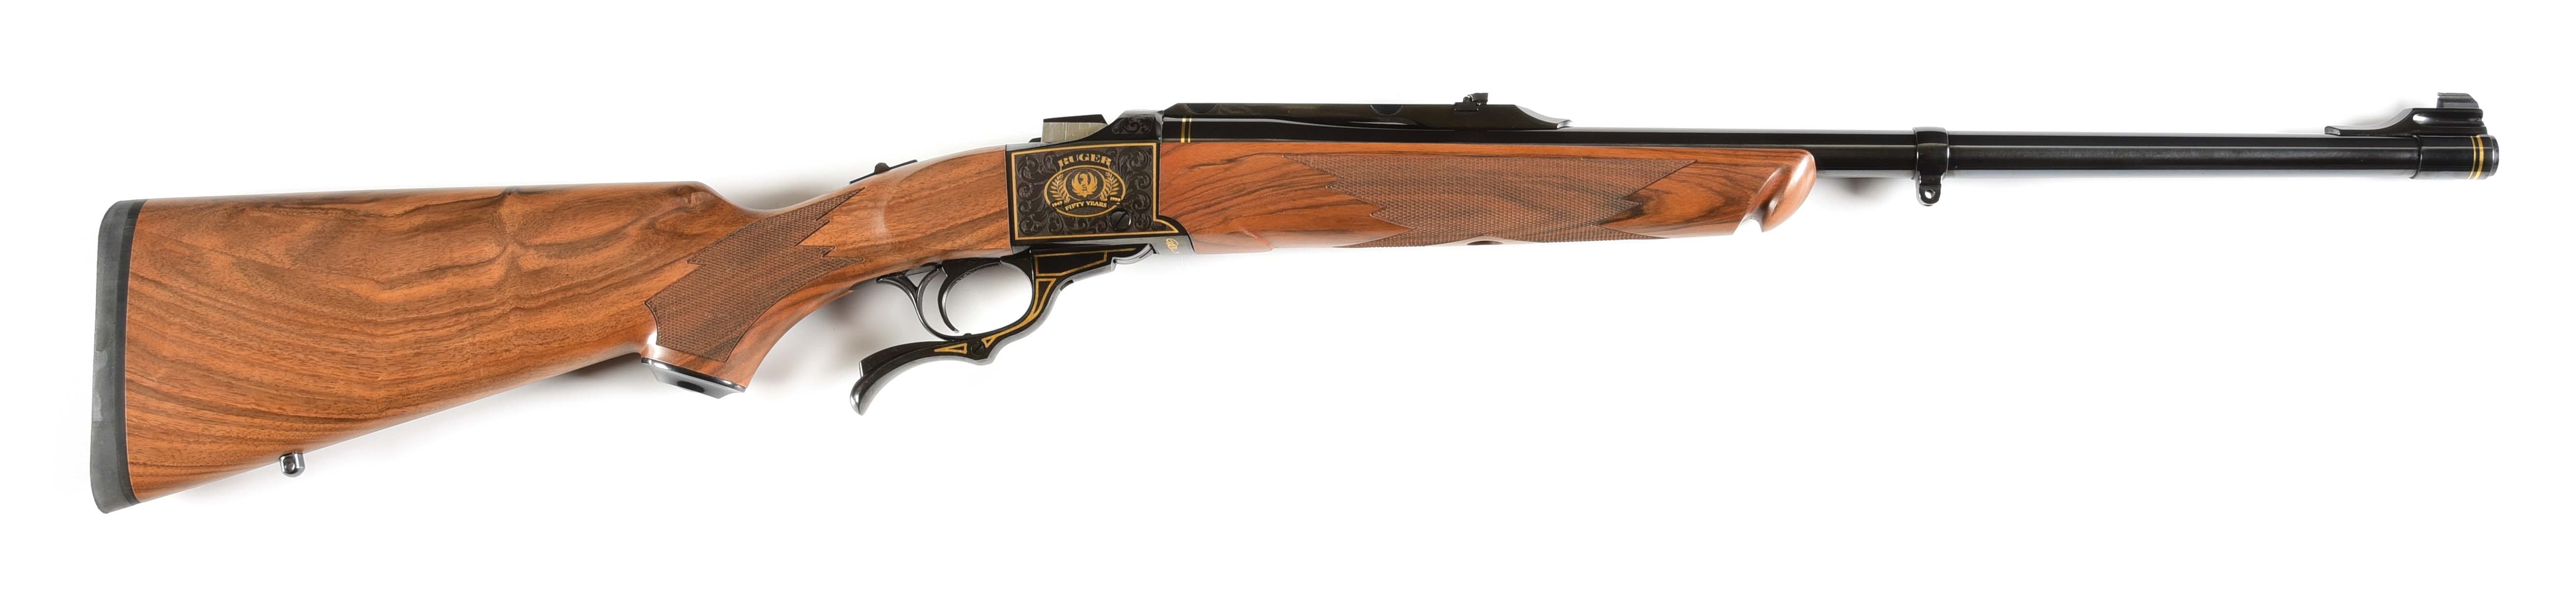 (M) RUGER NO. 1 50TH ANNIVERSARY SINGLE SHOT RIFLE IN .45-70.